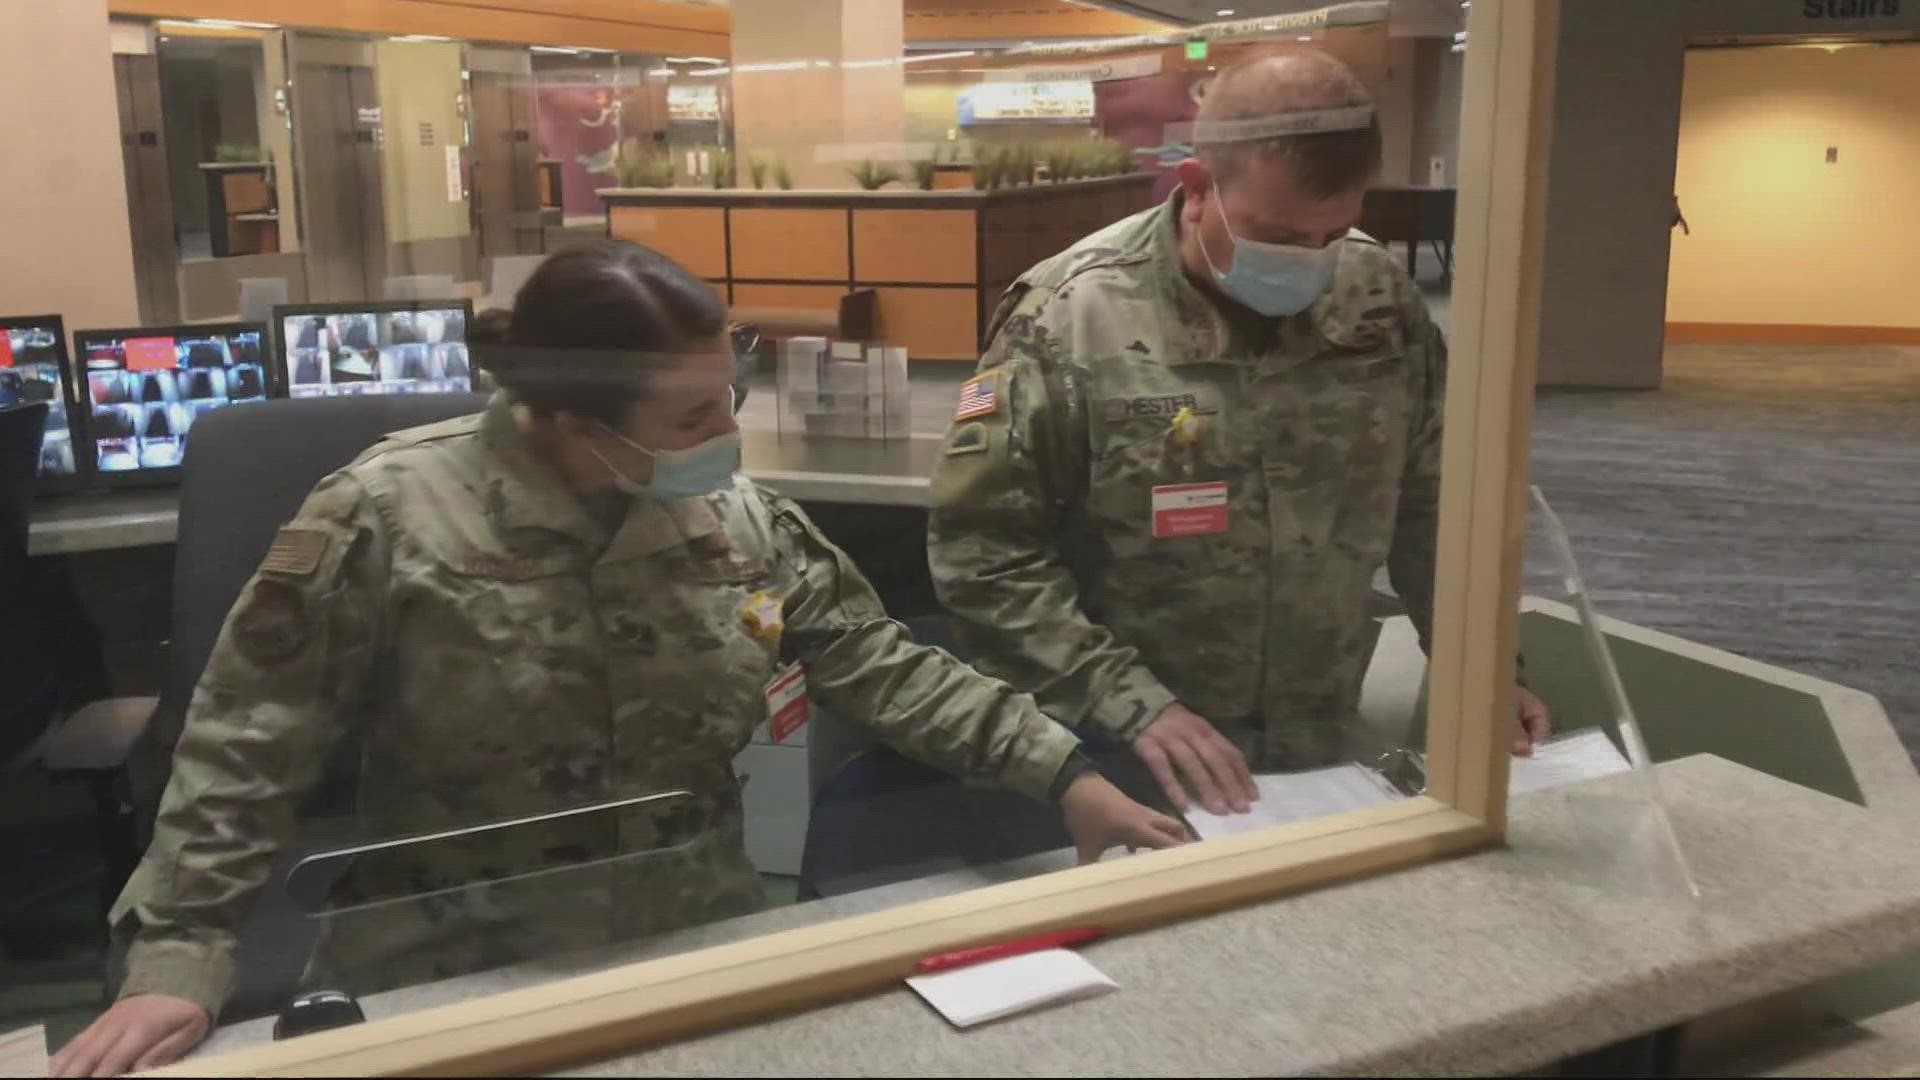 Nearly 150 citizen soldiers are helping nurses and doctors at Providence St. Vincent Medical Center. Gov. Kate Brown has mobilized 1,500 guard members across Oregon.